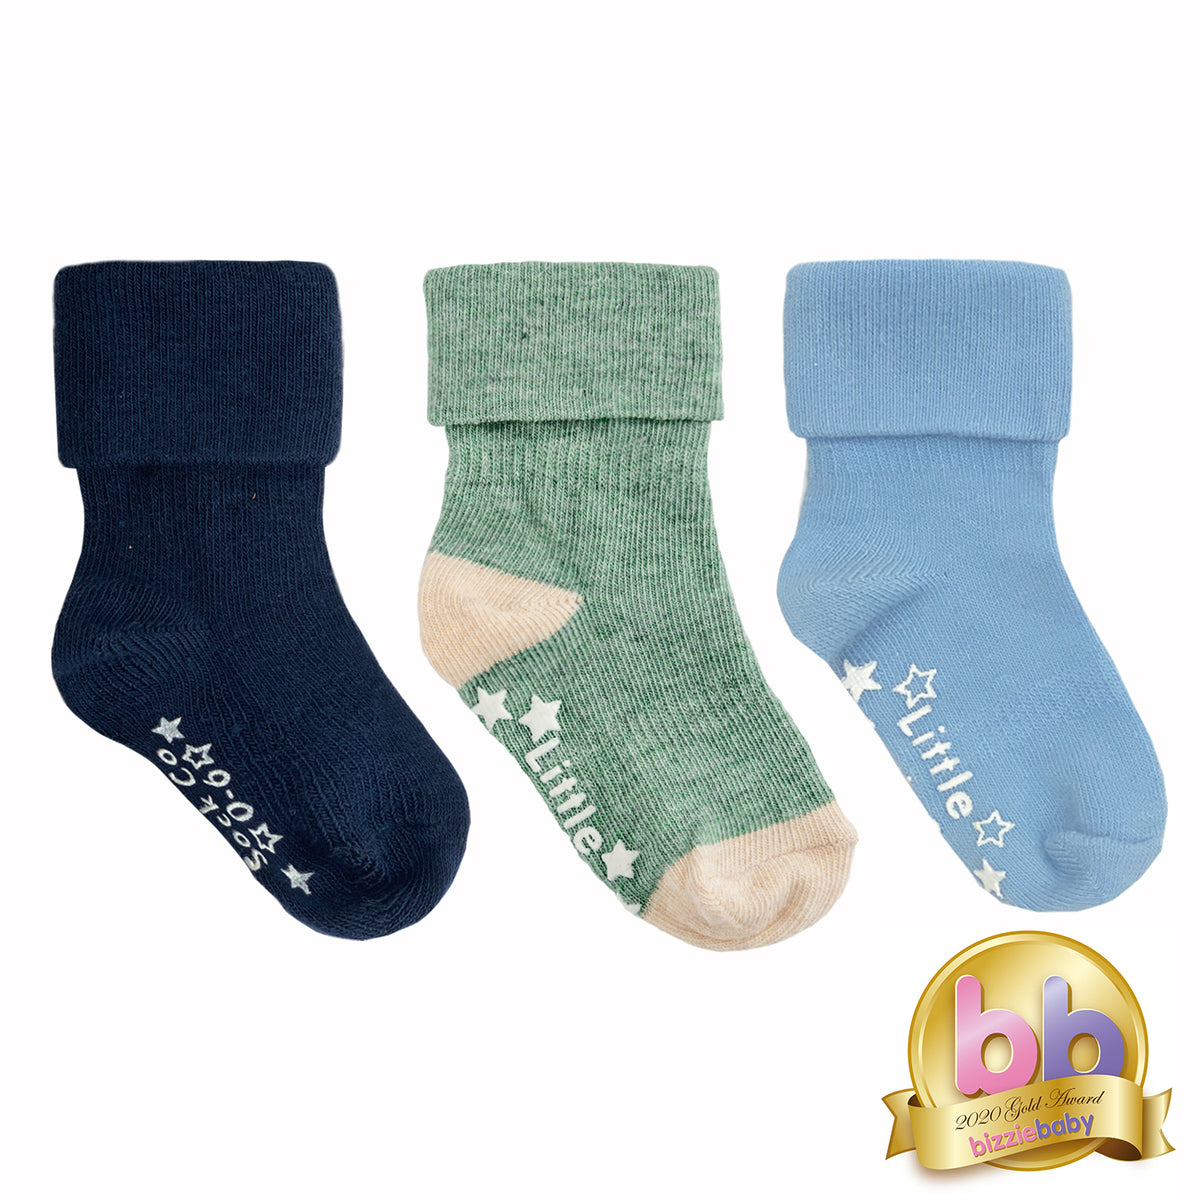 Non-Slip Stay On Baby and Toddler Socks - 3 Pack in Ocean, Forest Green & Navy